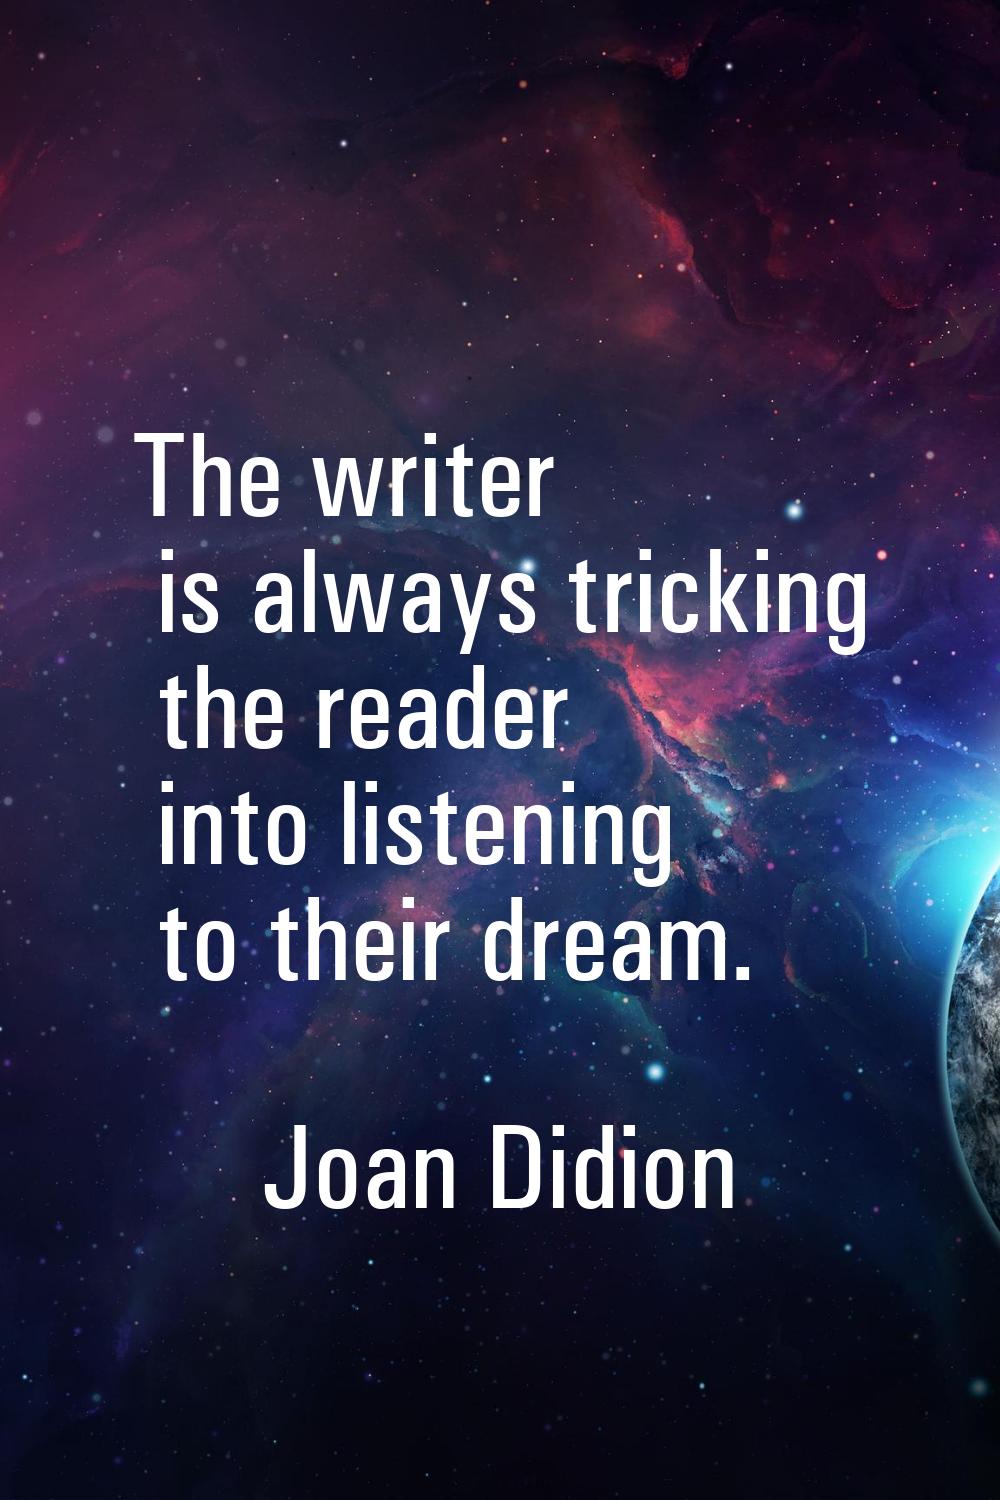 The writer is always tricking the reader into listening to their dream.